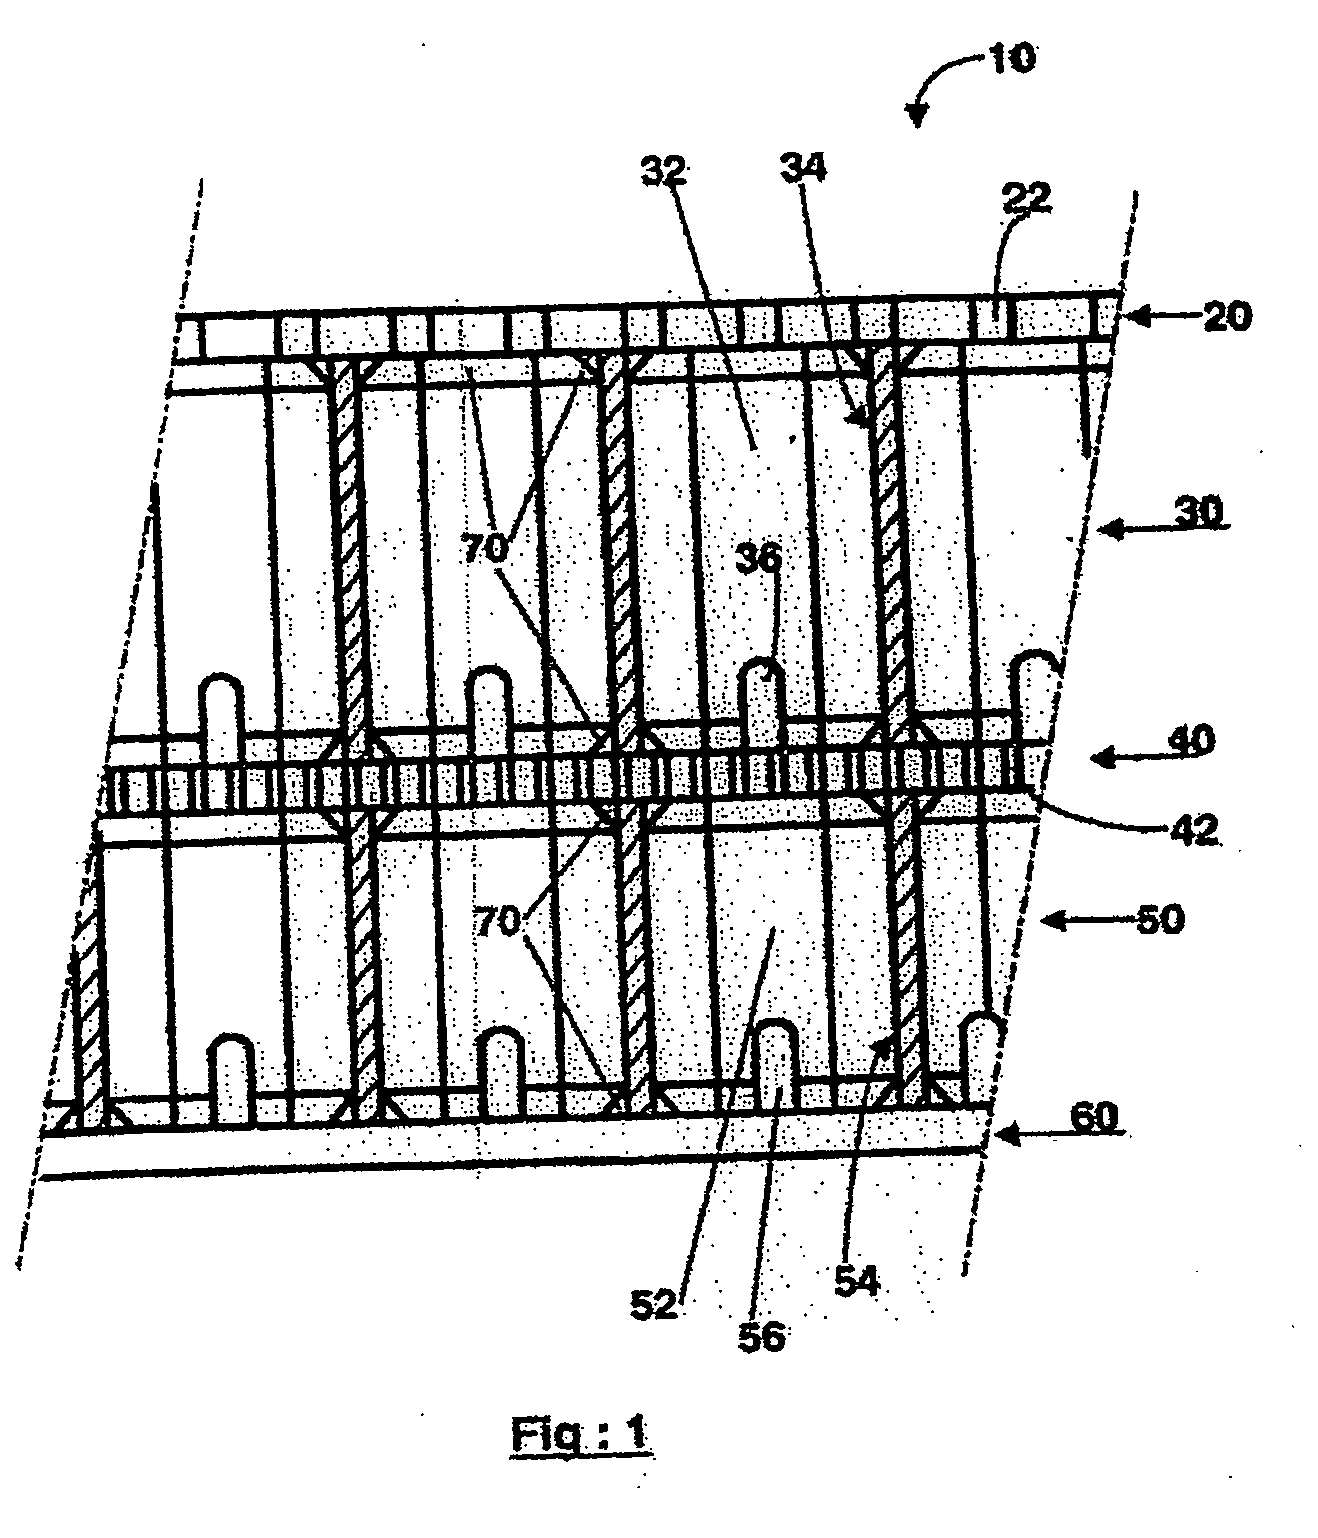 Method of assembling and checking a double-resonator acoustic panel with a honeycomb core